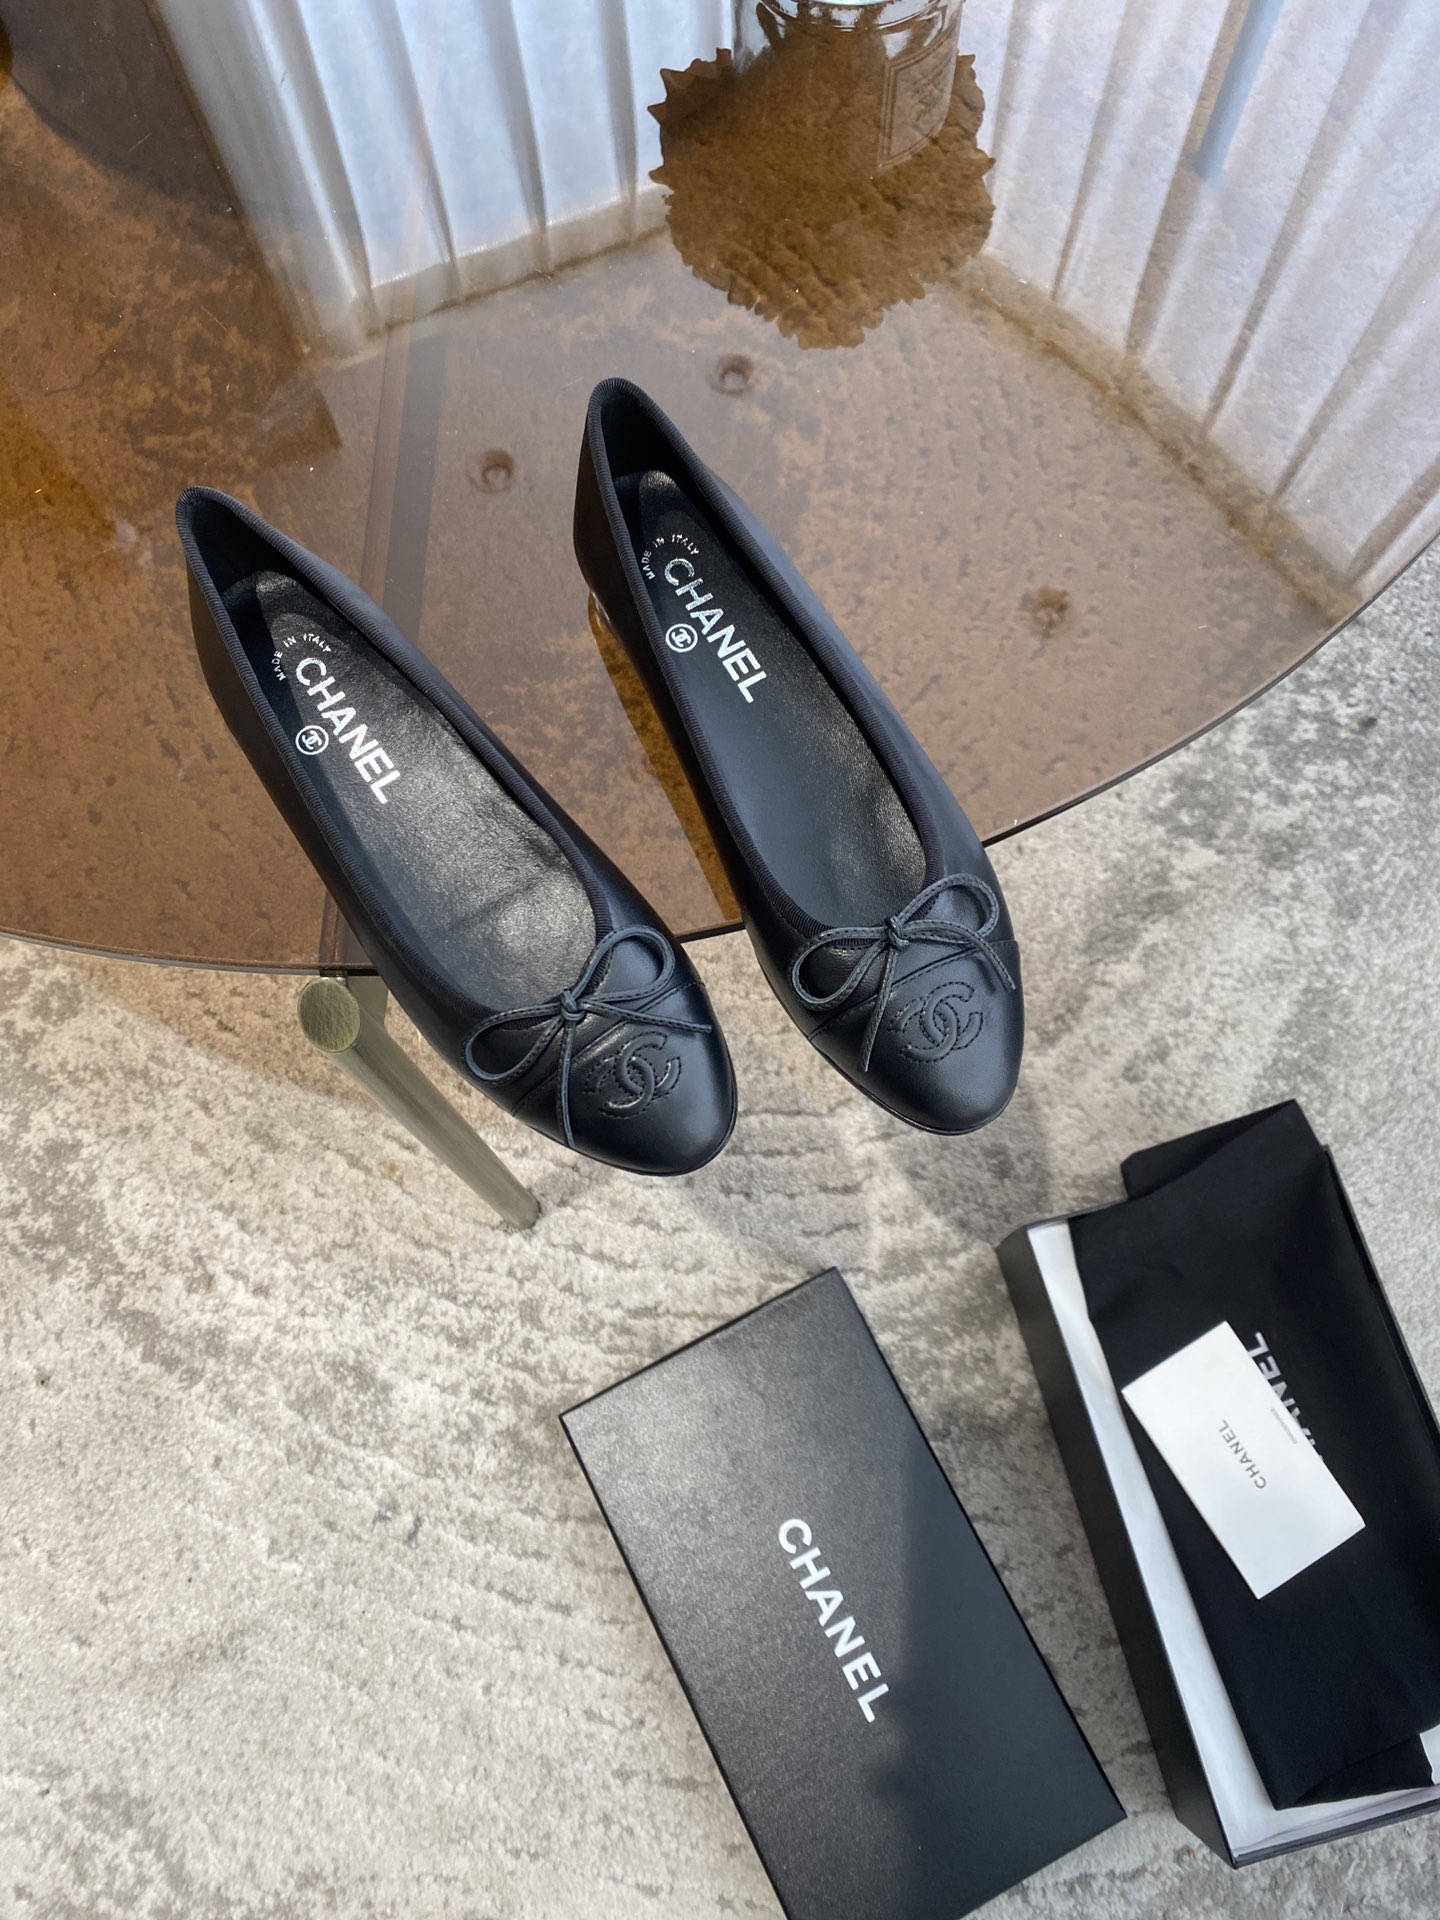 Chanel Ballerina Flat shoes high quality and genuine leather